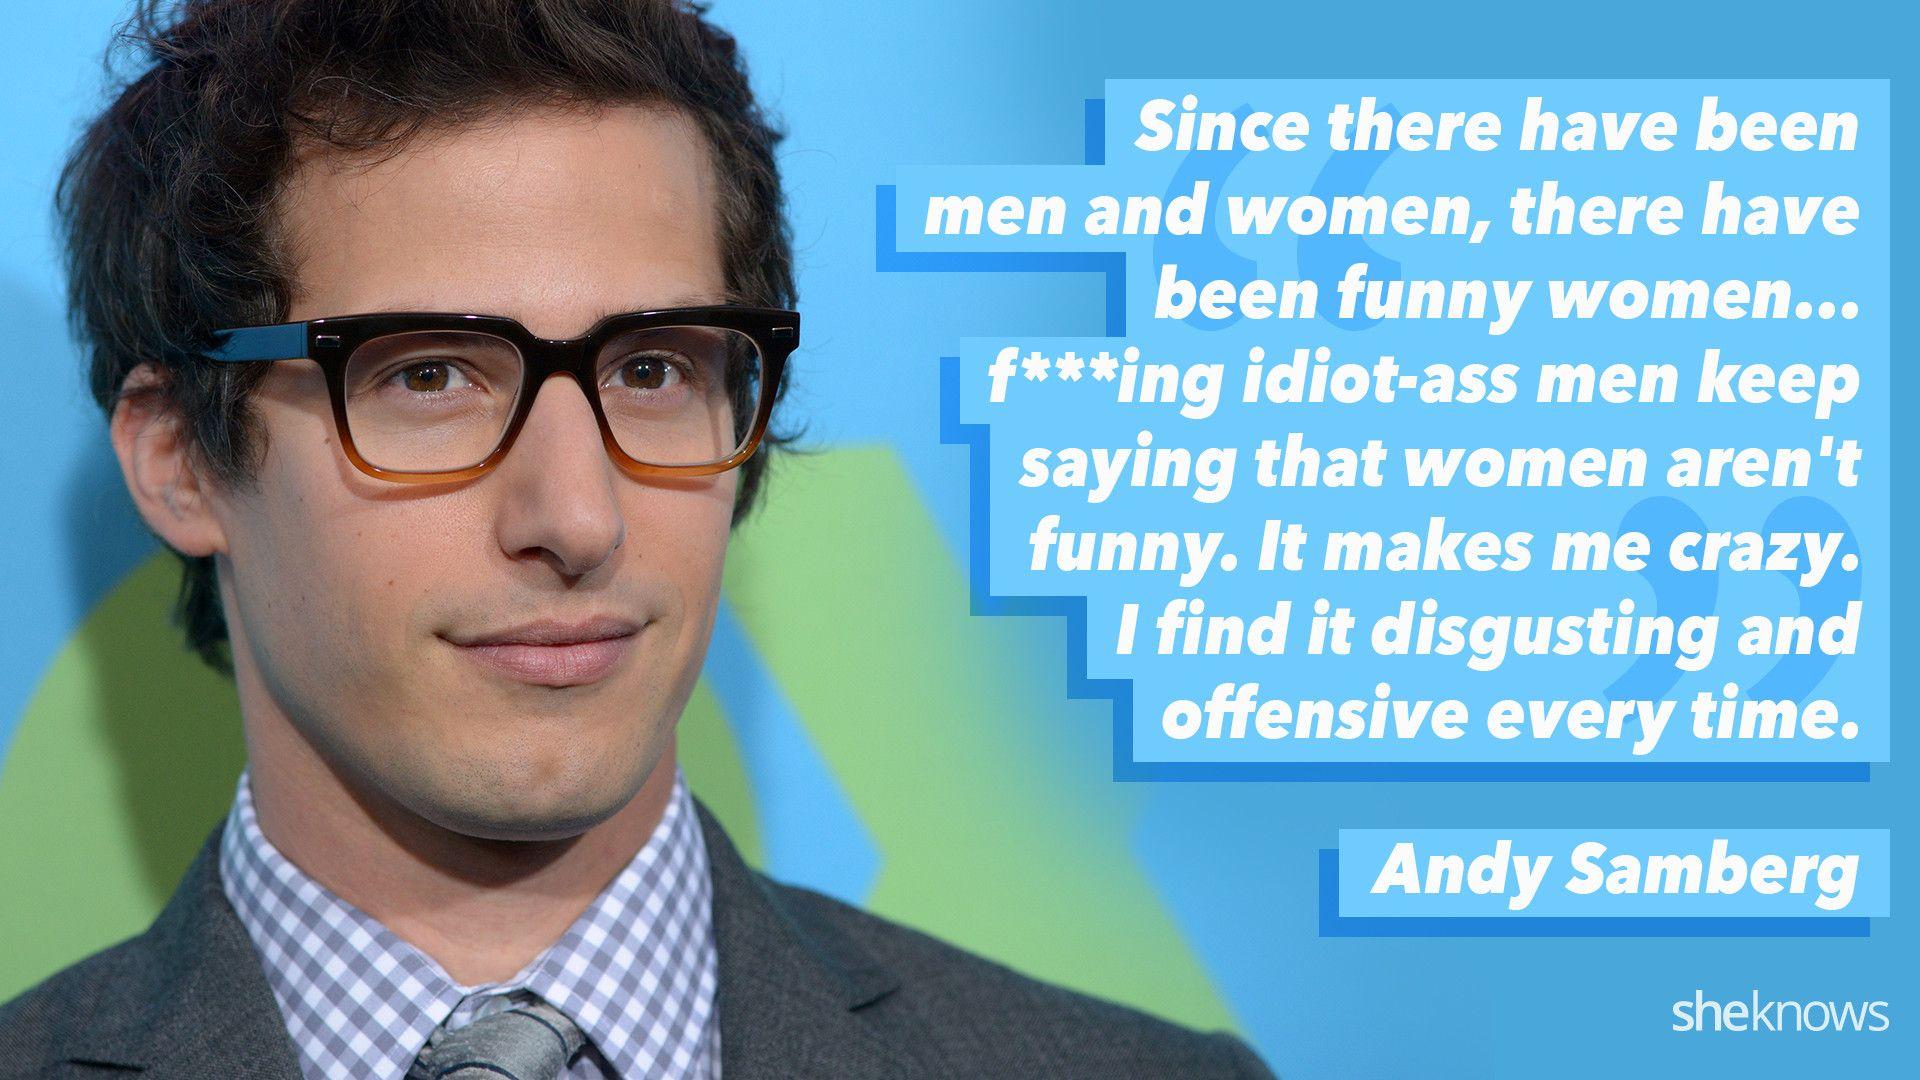 Best Quotes About Feminism From Male Celebs. Society and Its